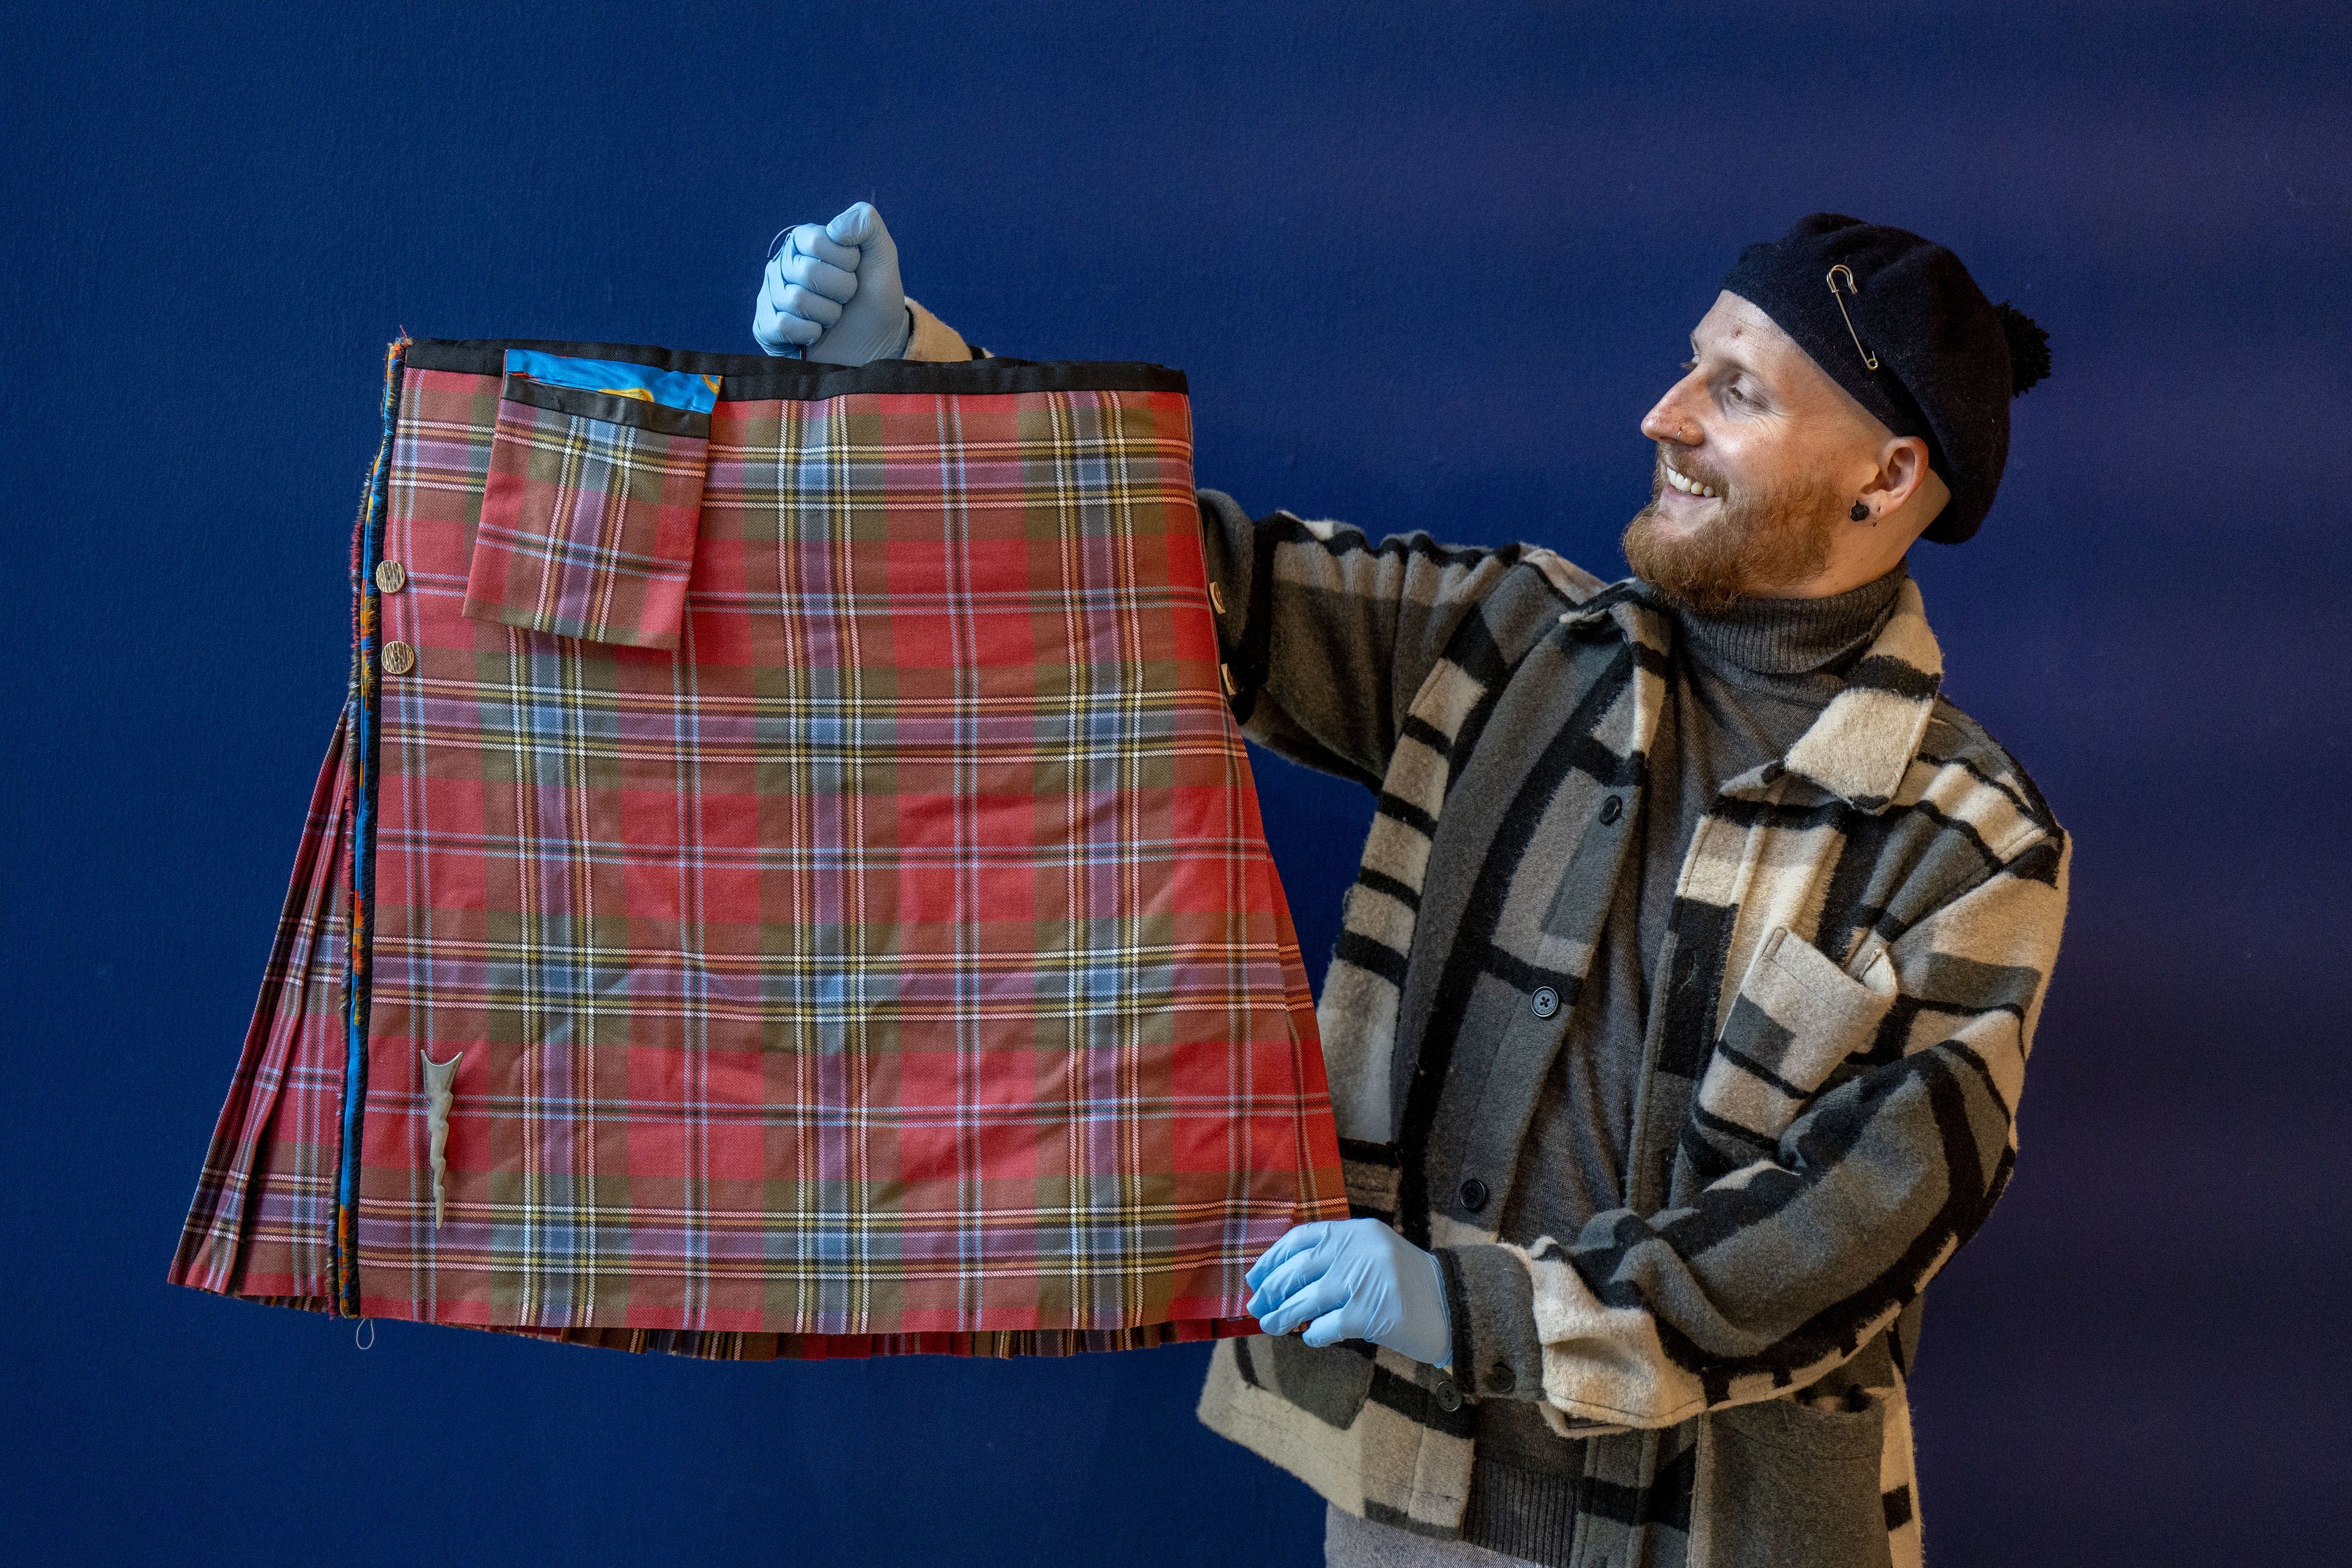 The kilt will become part of the People’s Tartan collection at the V&A Dundee (Jane Barlow/PA)